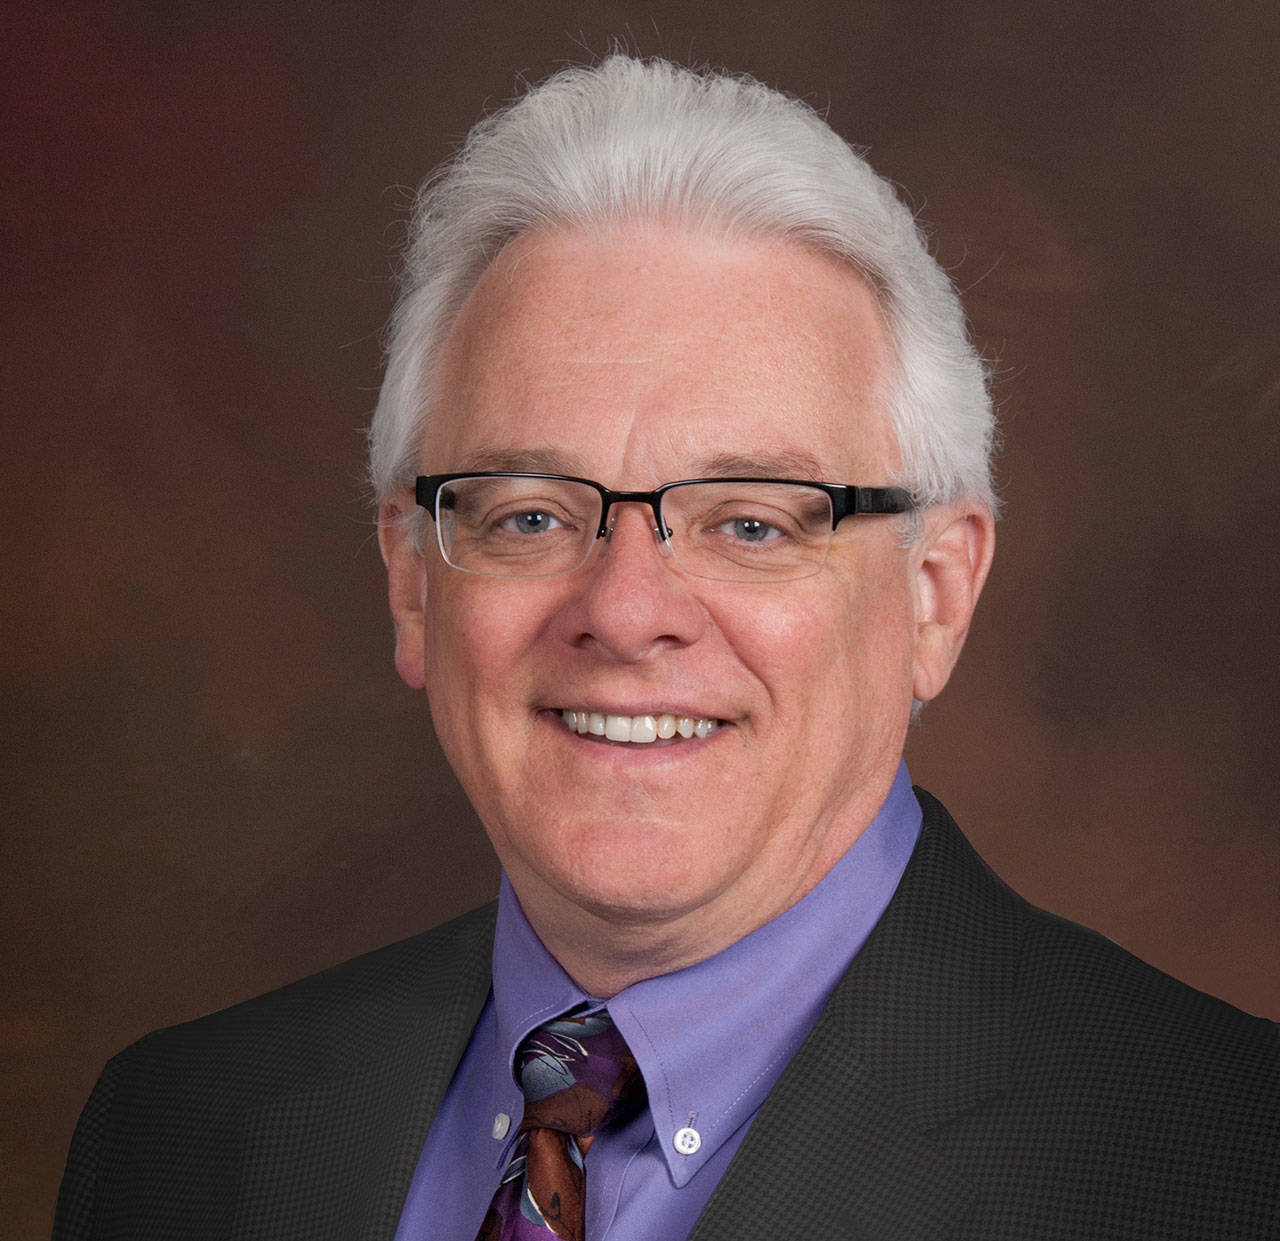 Dr. Luke Robins announced this month plans to retire at the end of the 2021-2022 academic year, college sources say. Photo courtesy of Peninsula College